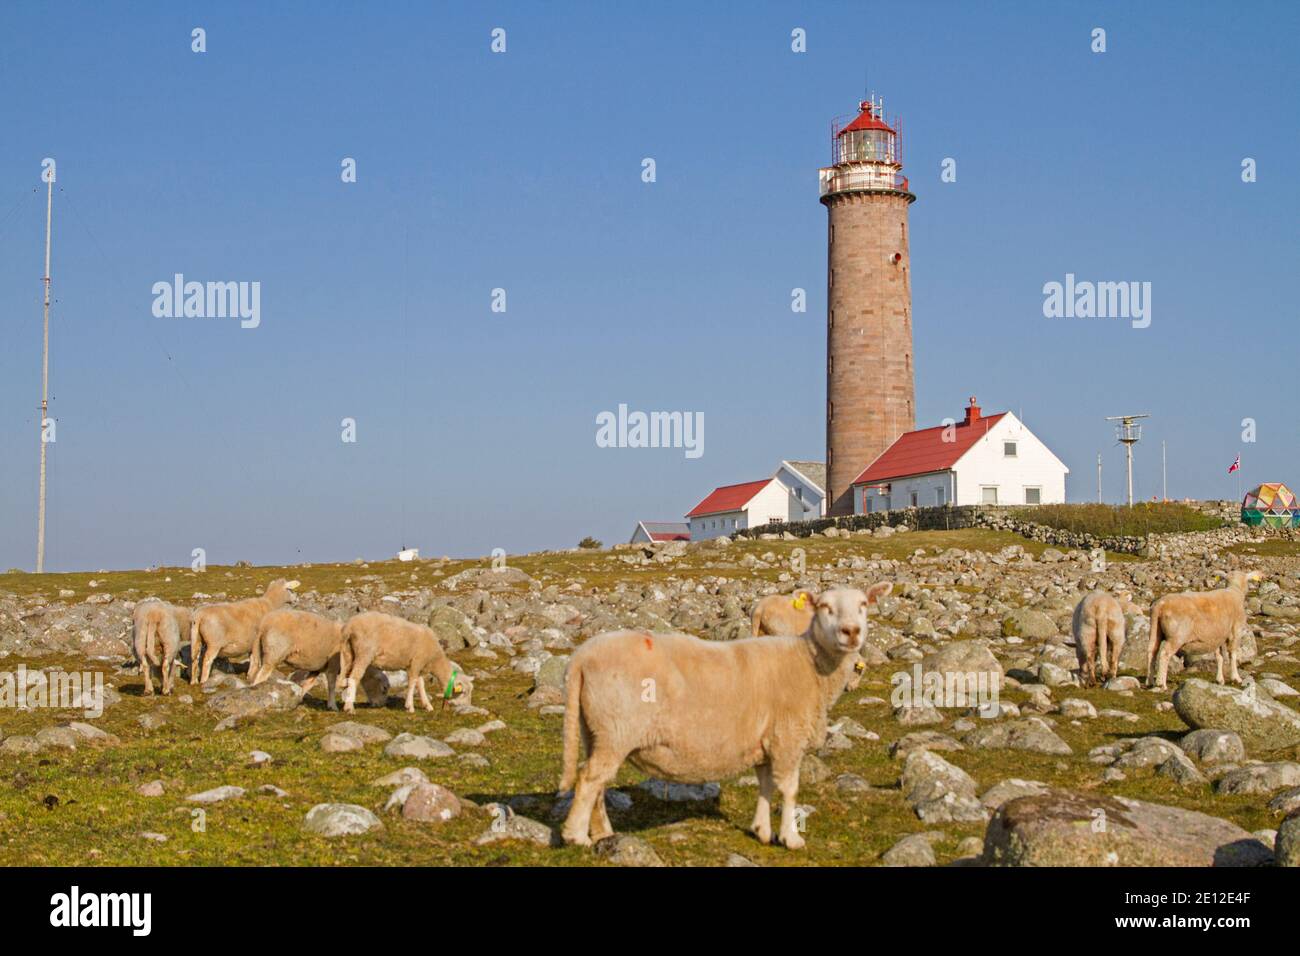 The 28 M High Lista Fyr Lighthouse Is The Landmark Of The Small Lista Peninsula In The South Of Norway. Stock Photo